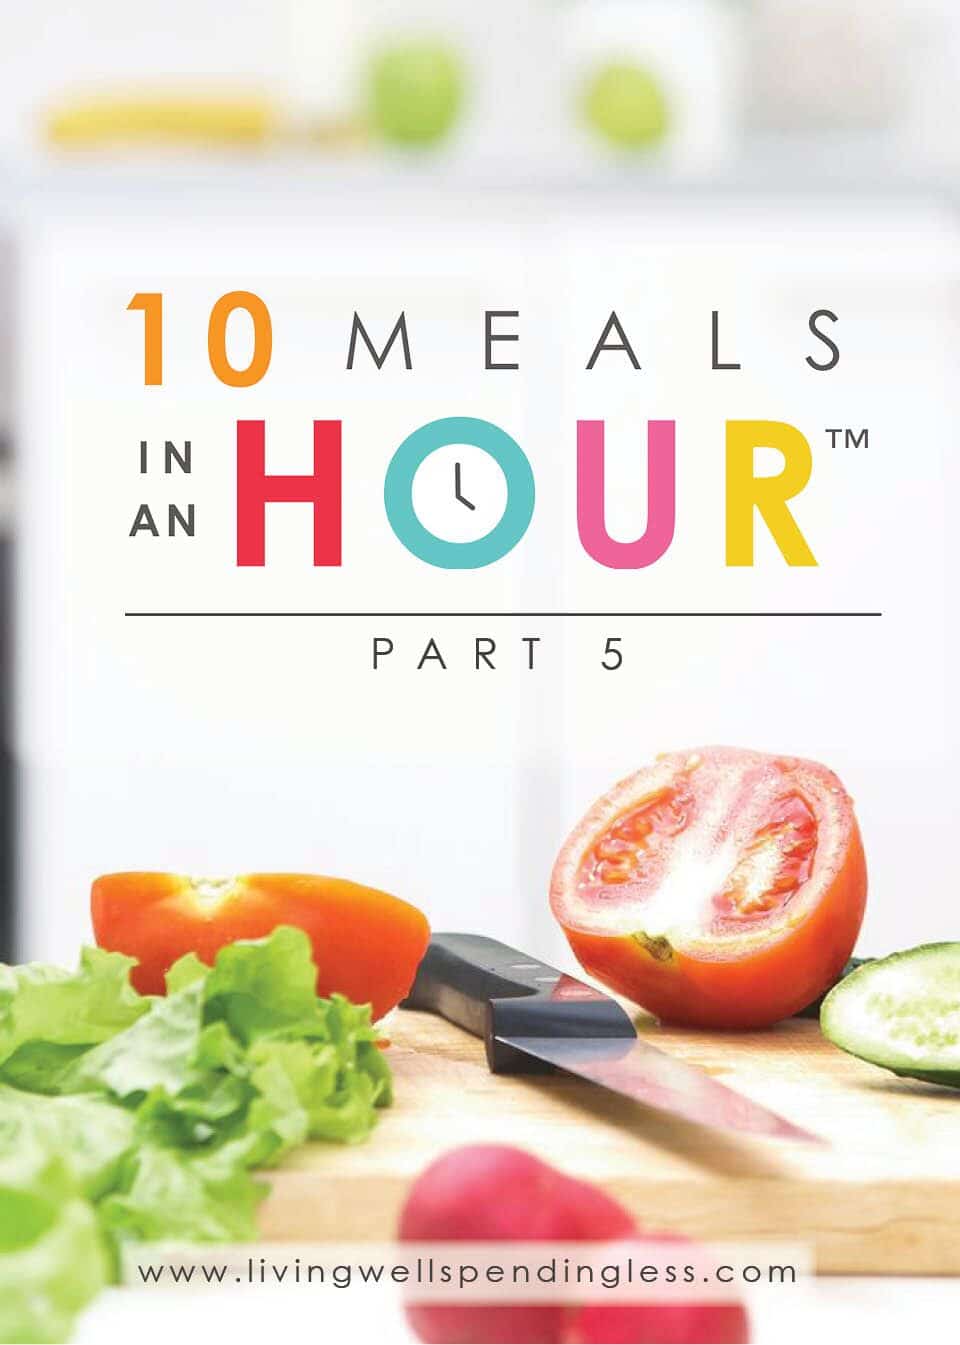 10 Meals in an Hour part 5 | Freezer Cooking | Freezer Meals | Meal Planning | Food Made Simple